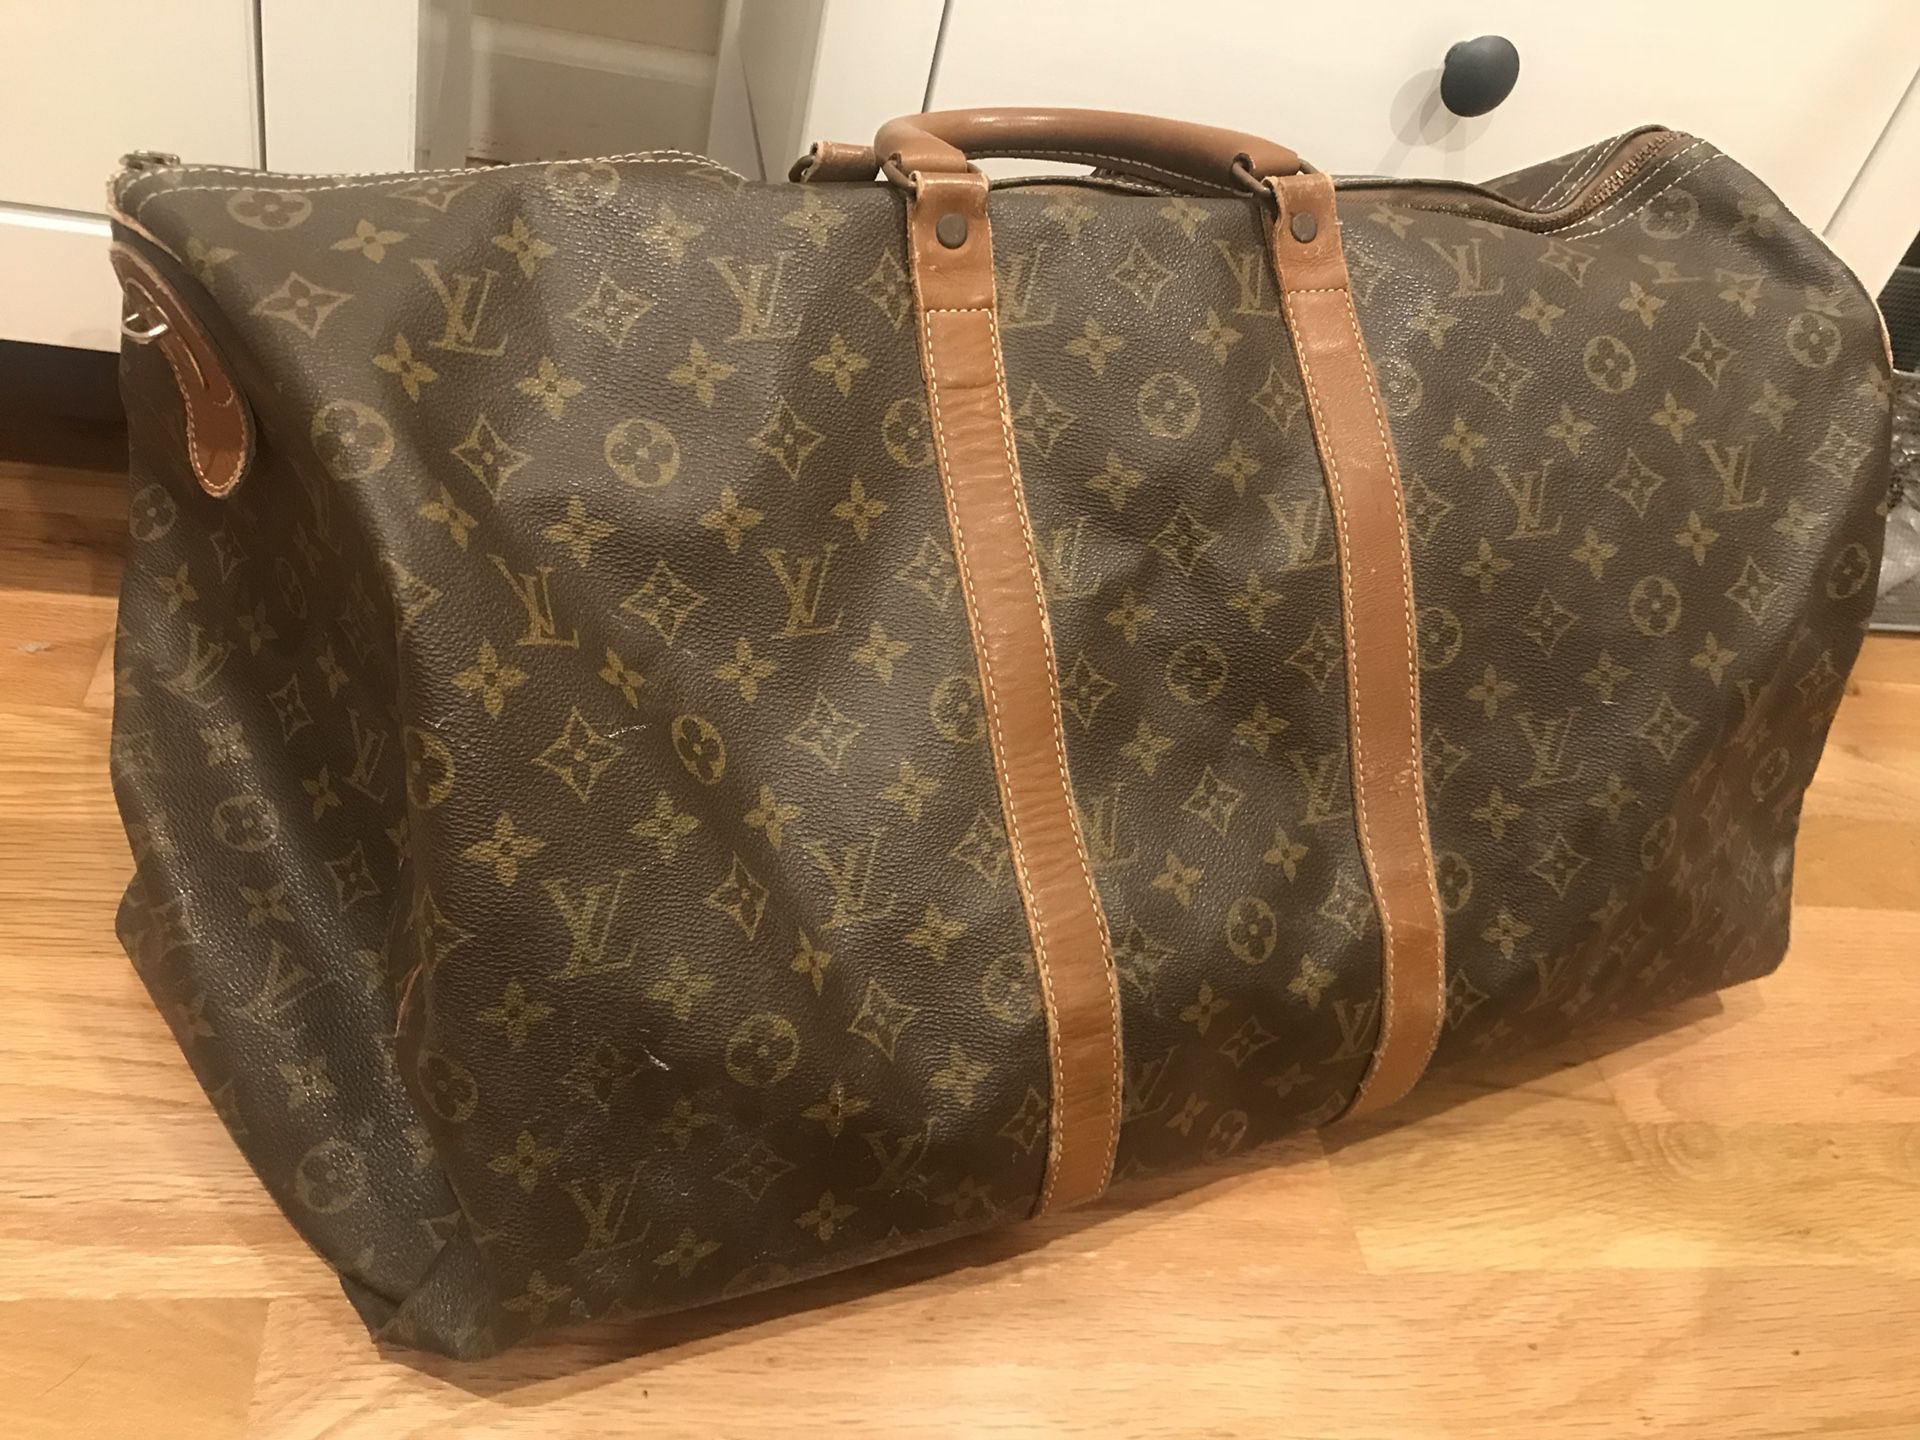 Louis Vuitton Duffle Bag for Sale in Brooklyn, NY - OfferUp